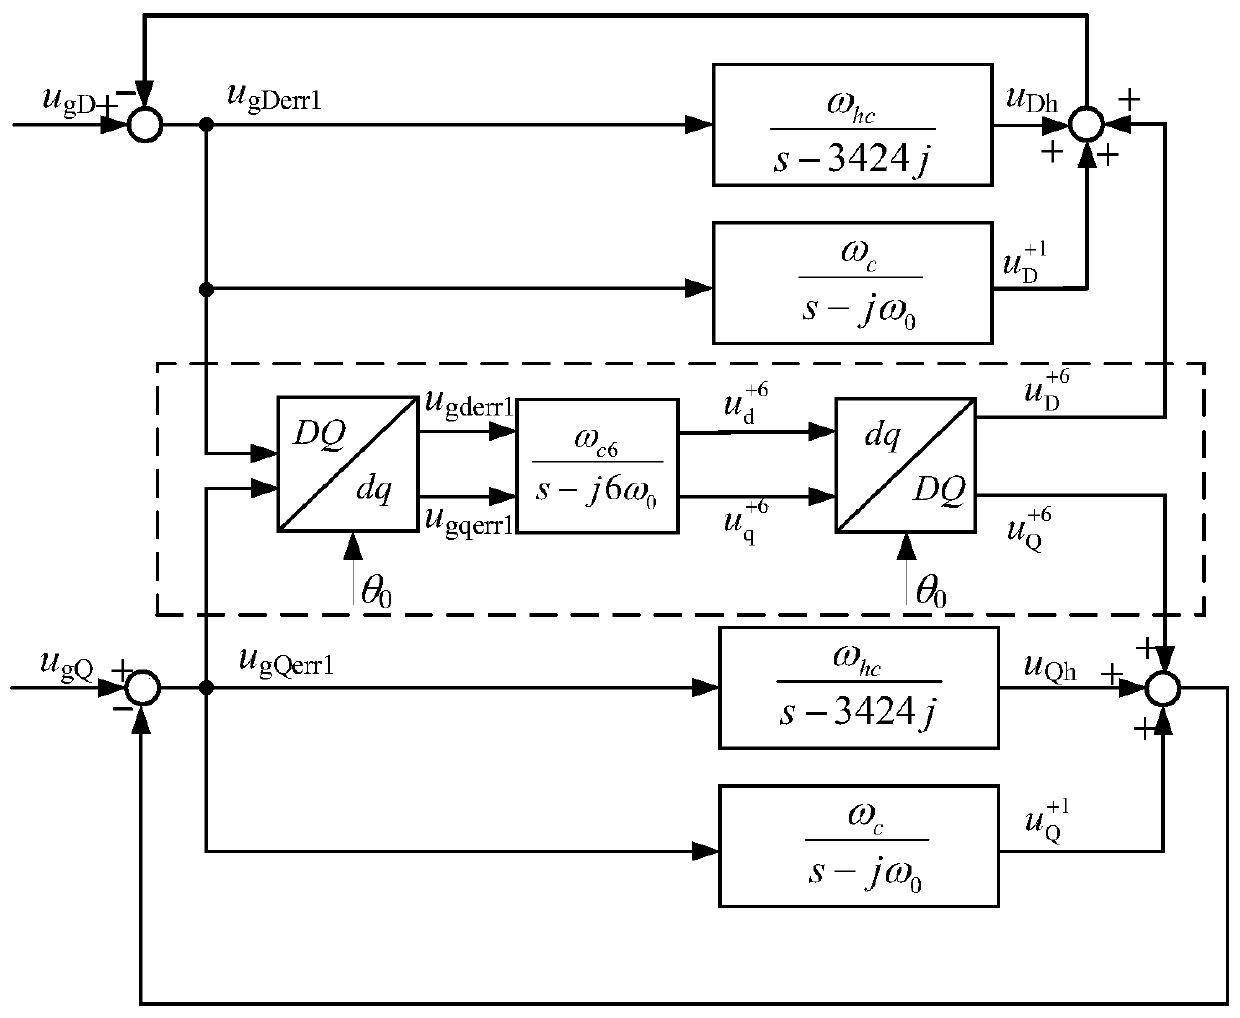 Grid impedance identification method for grid-connected inverter considering grid background harmonics